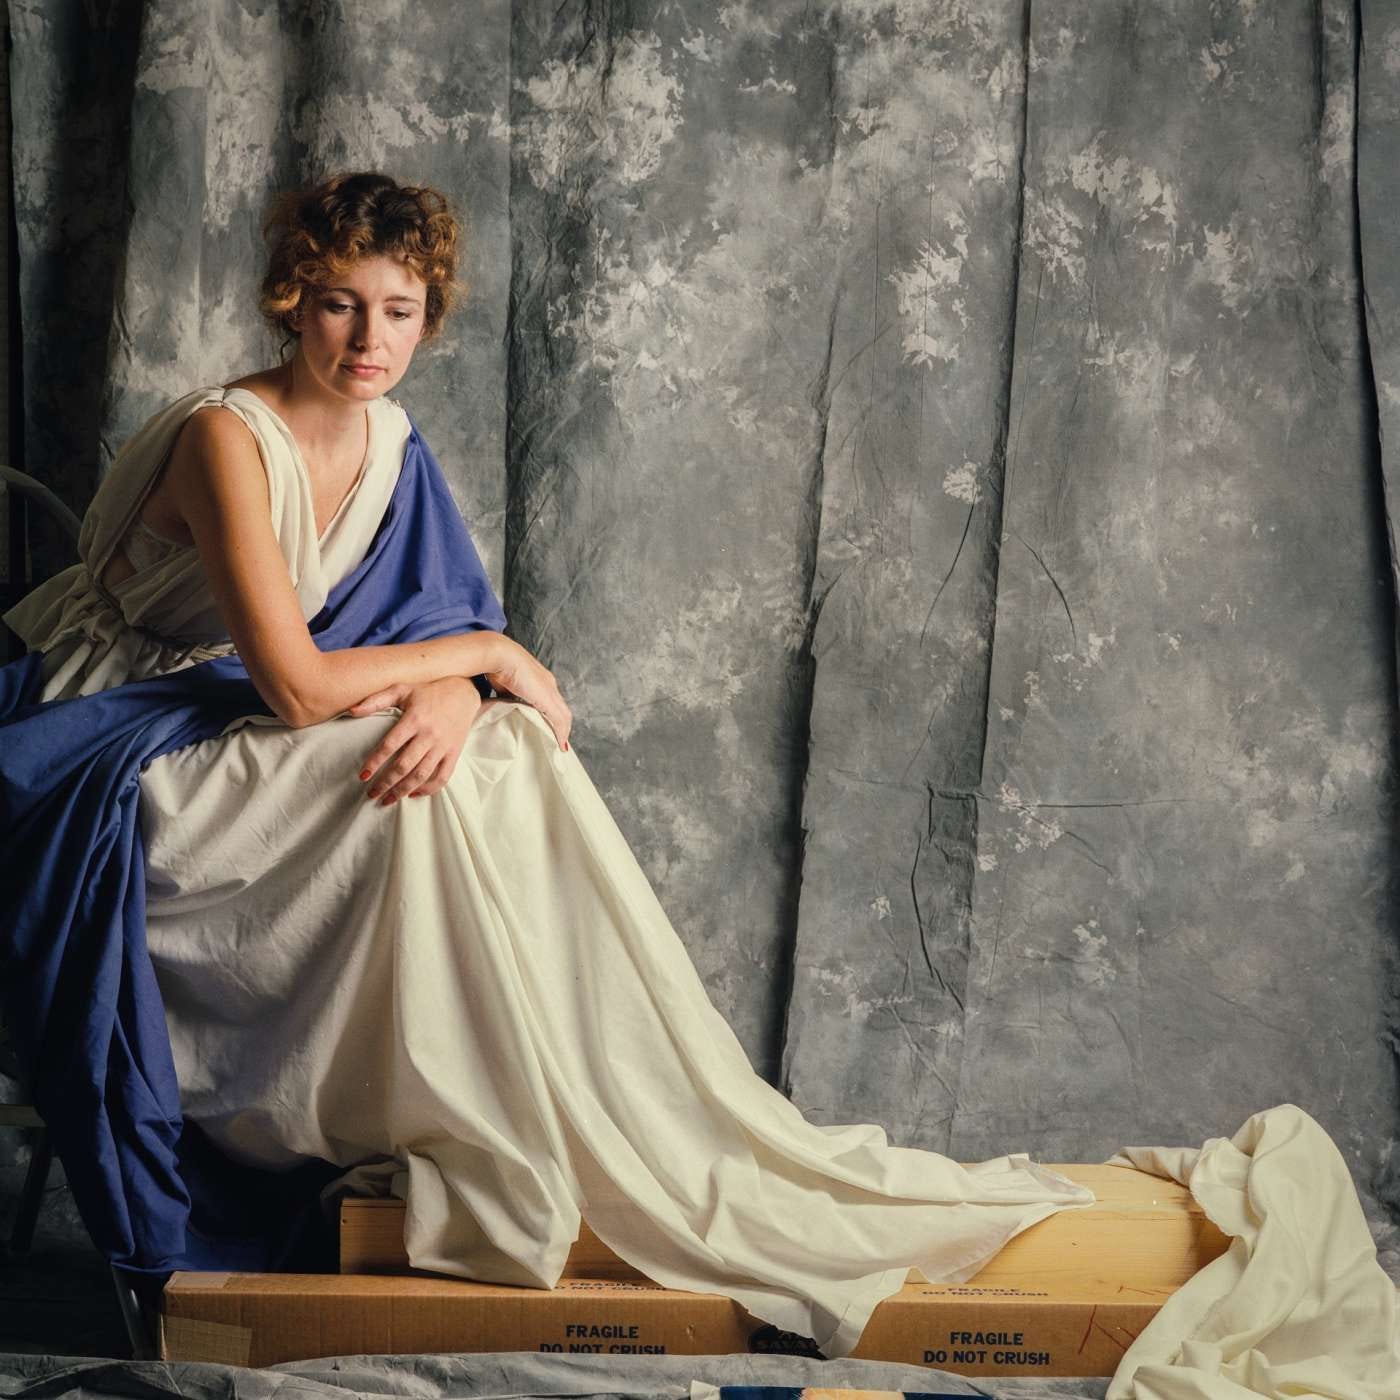 In 1992, a 28-Year-Old Jenny Joseph Modeling for What Would Become Today's Columbia Pictures ...